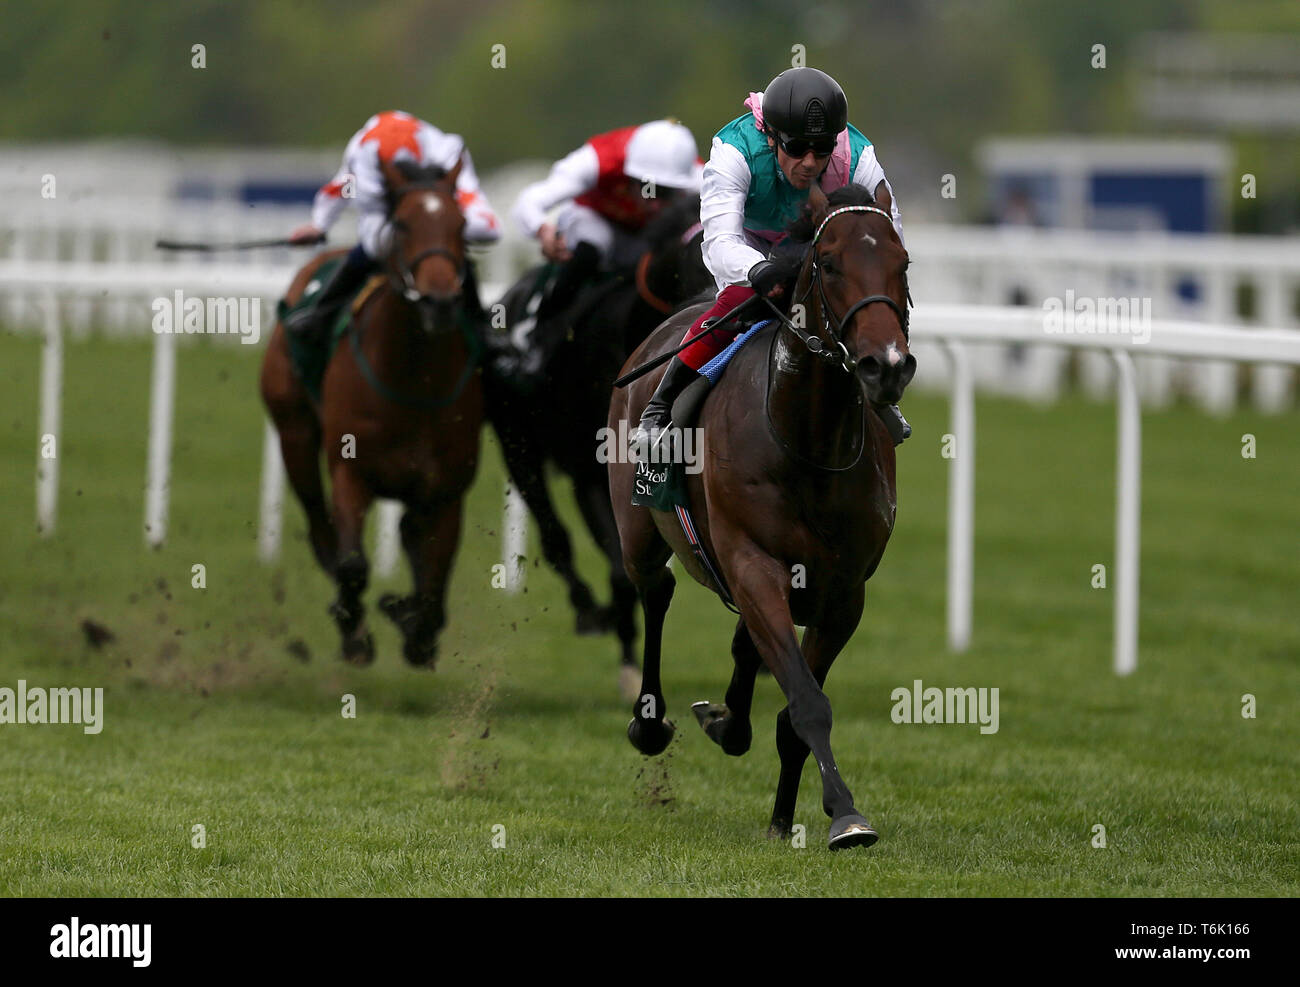 Calyx ridden by Jockey Frankie Dettori winning the Merriebelle Stable Commonwealth Cup Trial Stakes during Royal Ascot Trials Day at Ascot Racecourse. Stock Photo